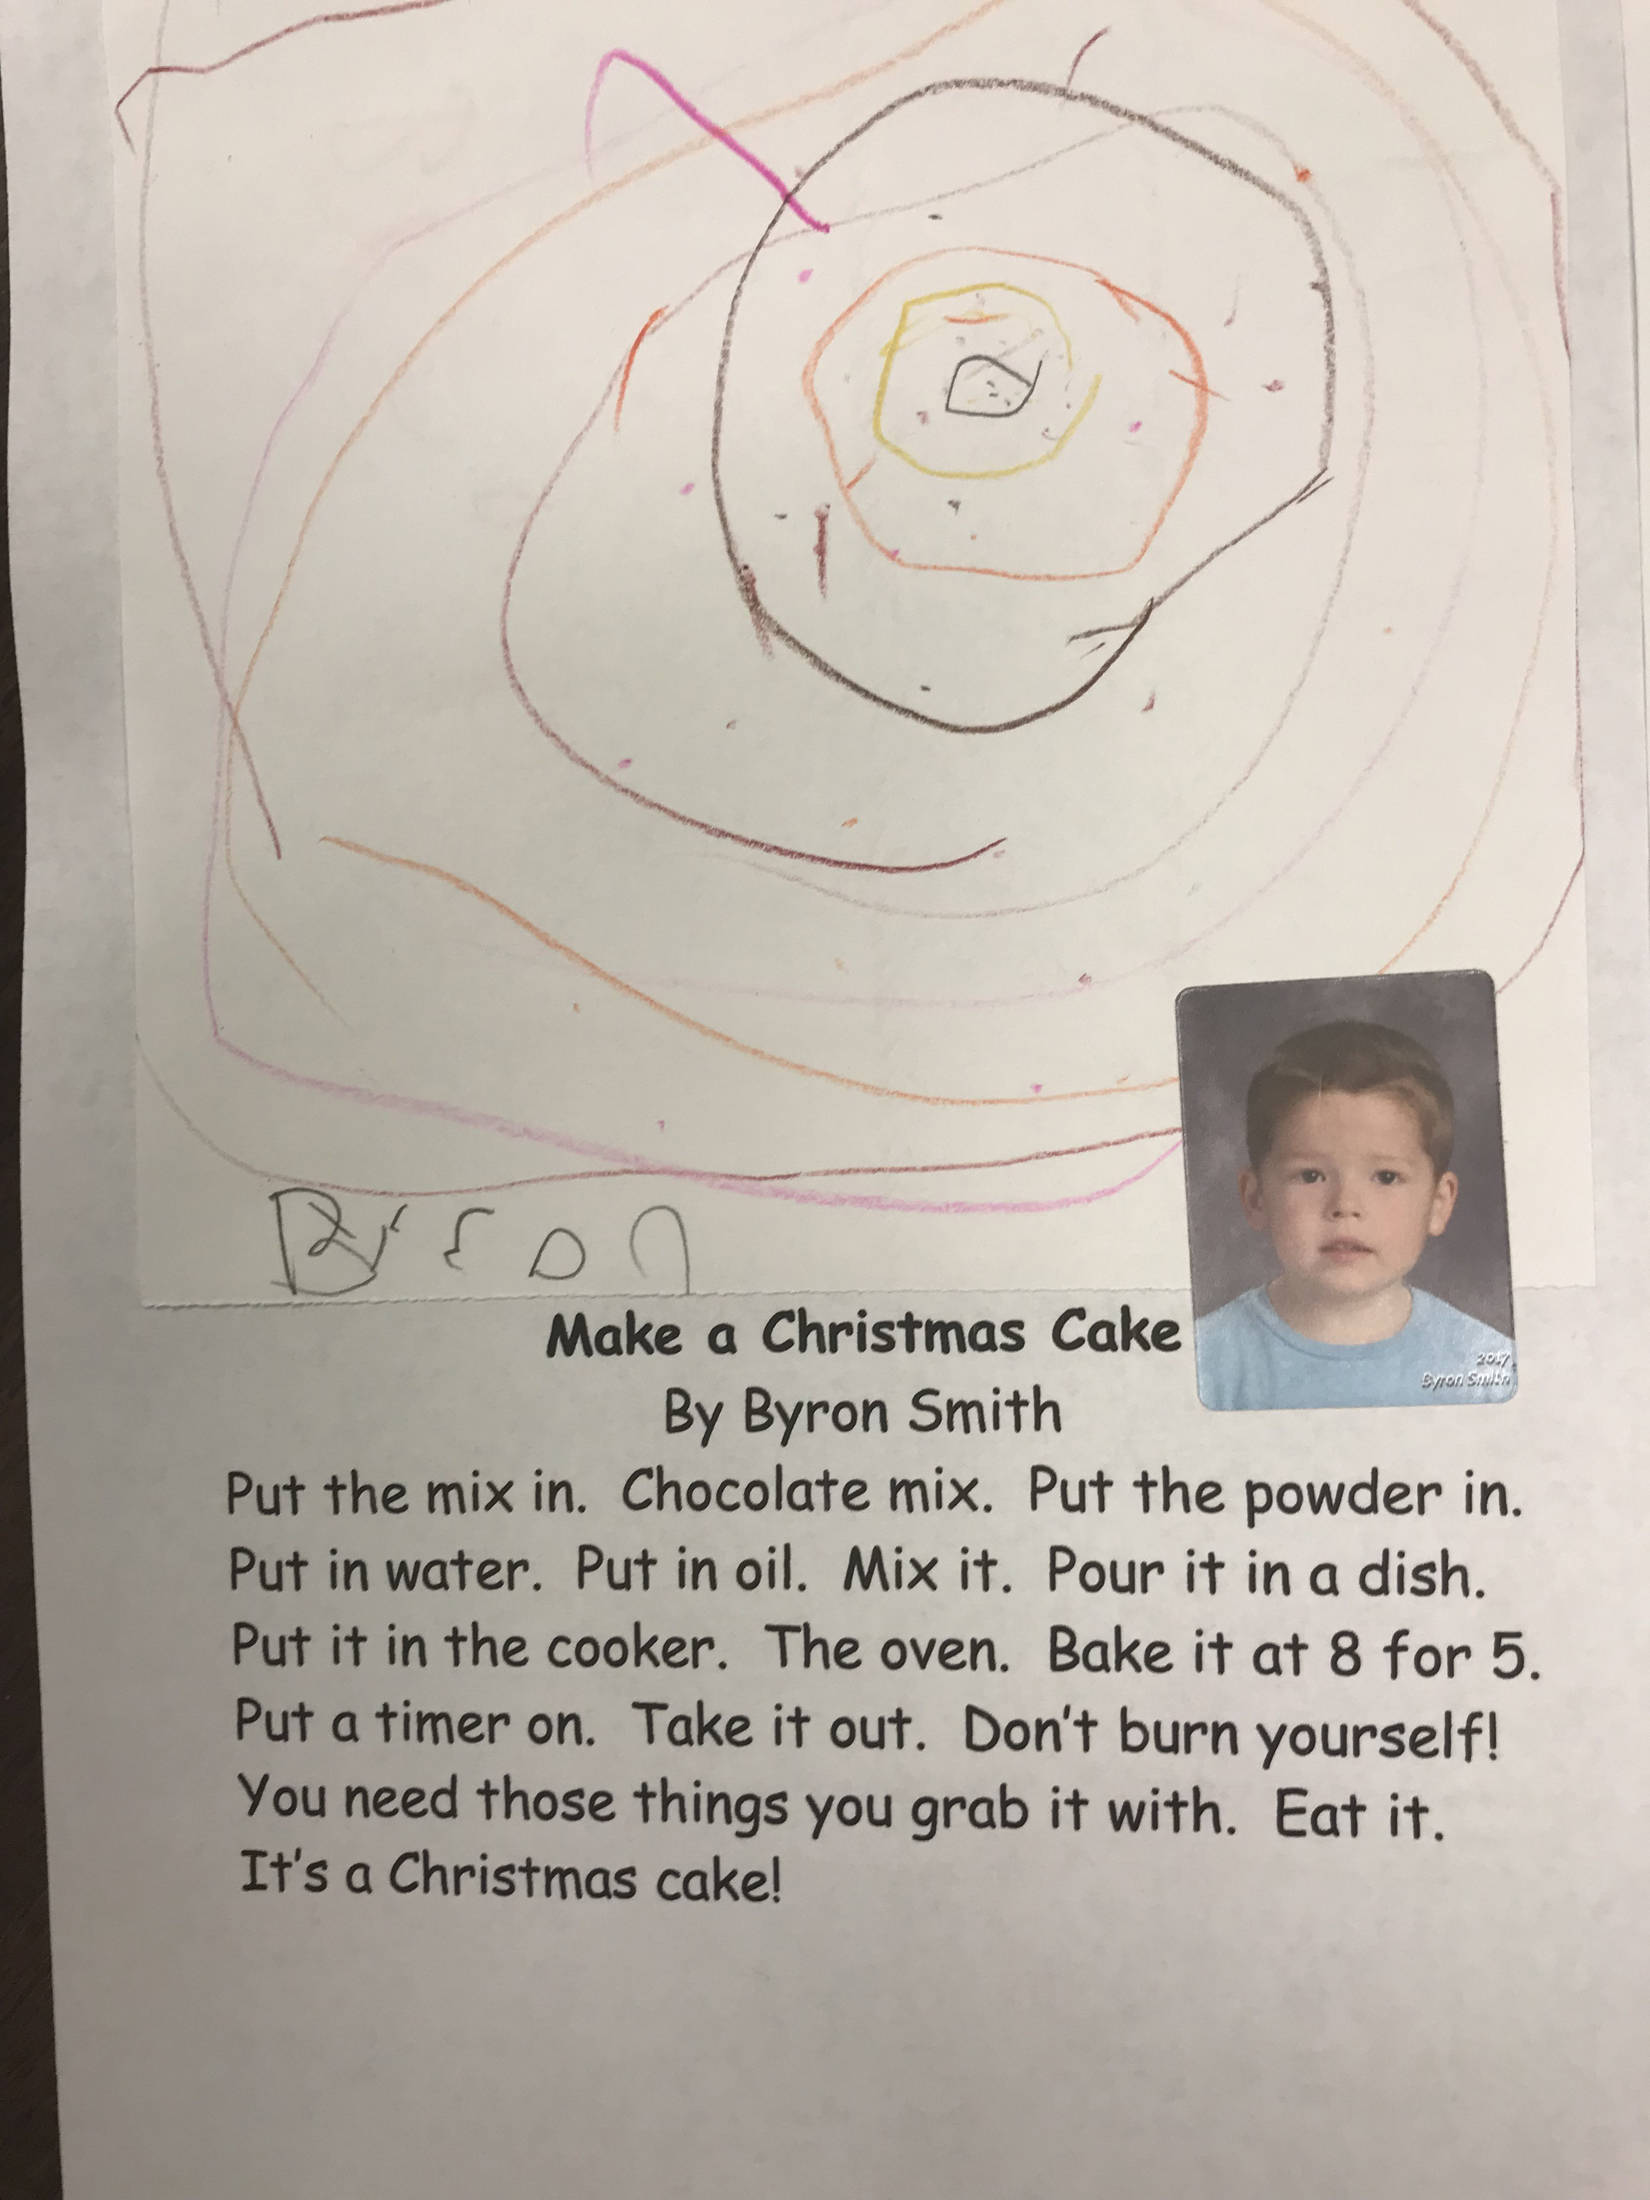 This holiday instruction made by Byron Smith is part of an 18-page “How to Get Ready for the Holidays” book created by the students of Jennifer Reinhart’s kindergarten class. (Photo courtesy Jennifer Reinhart)